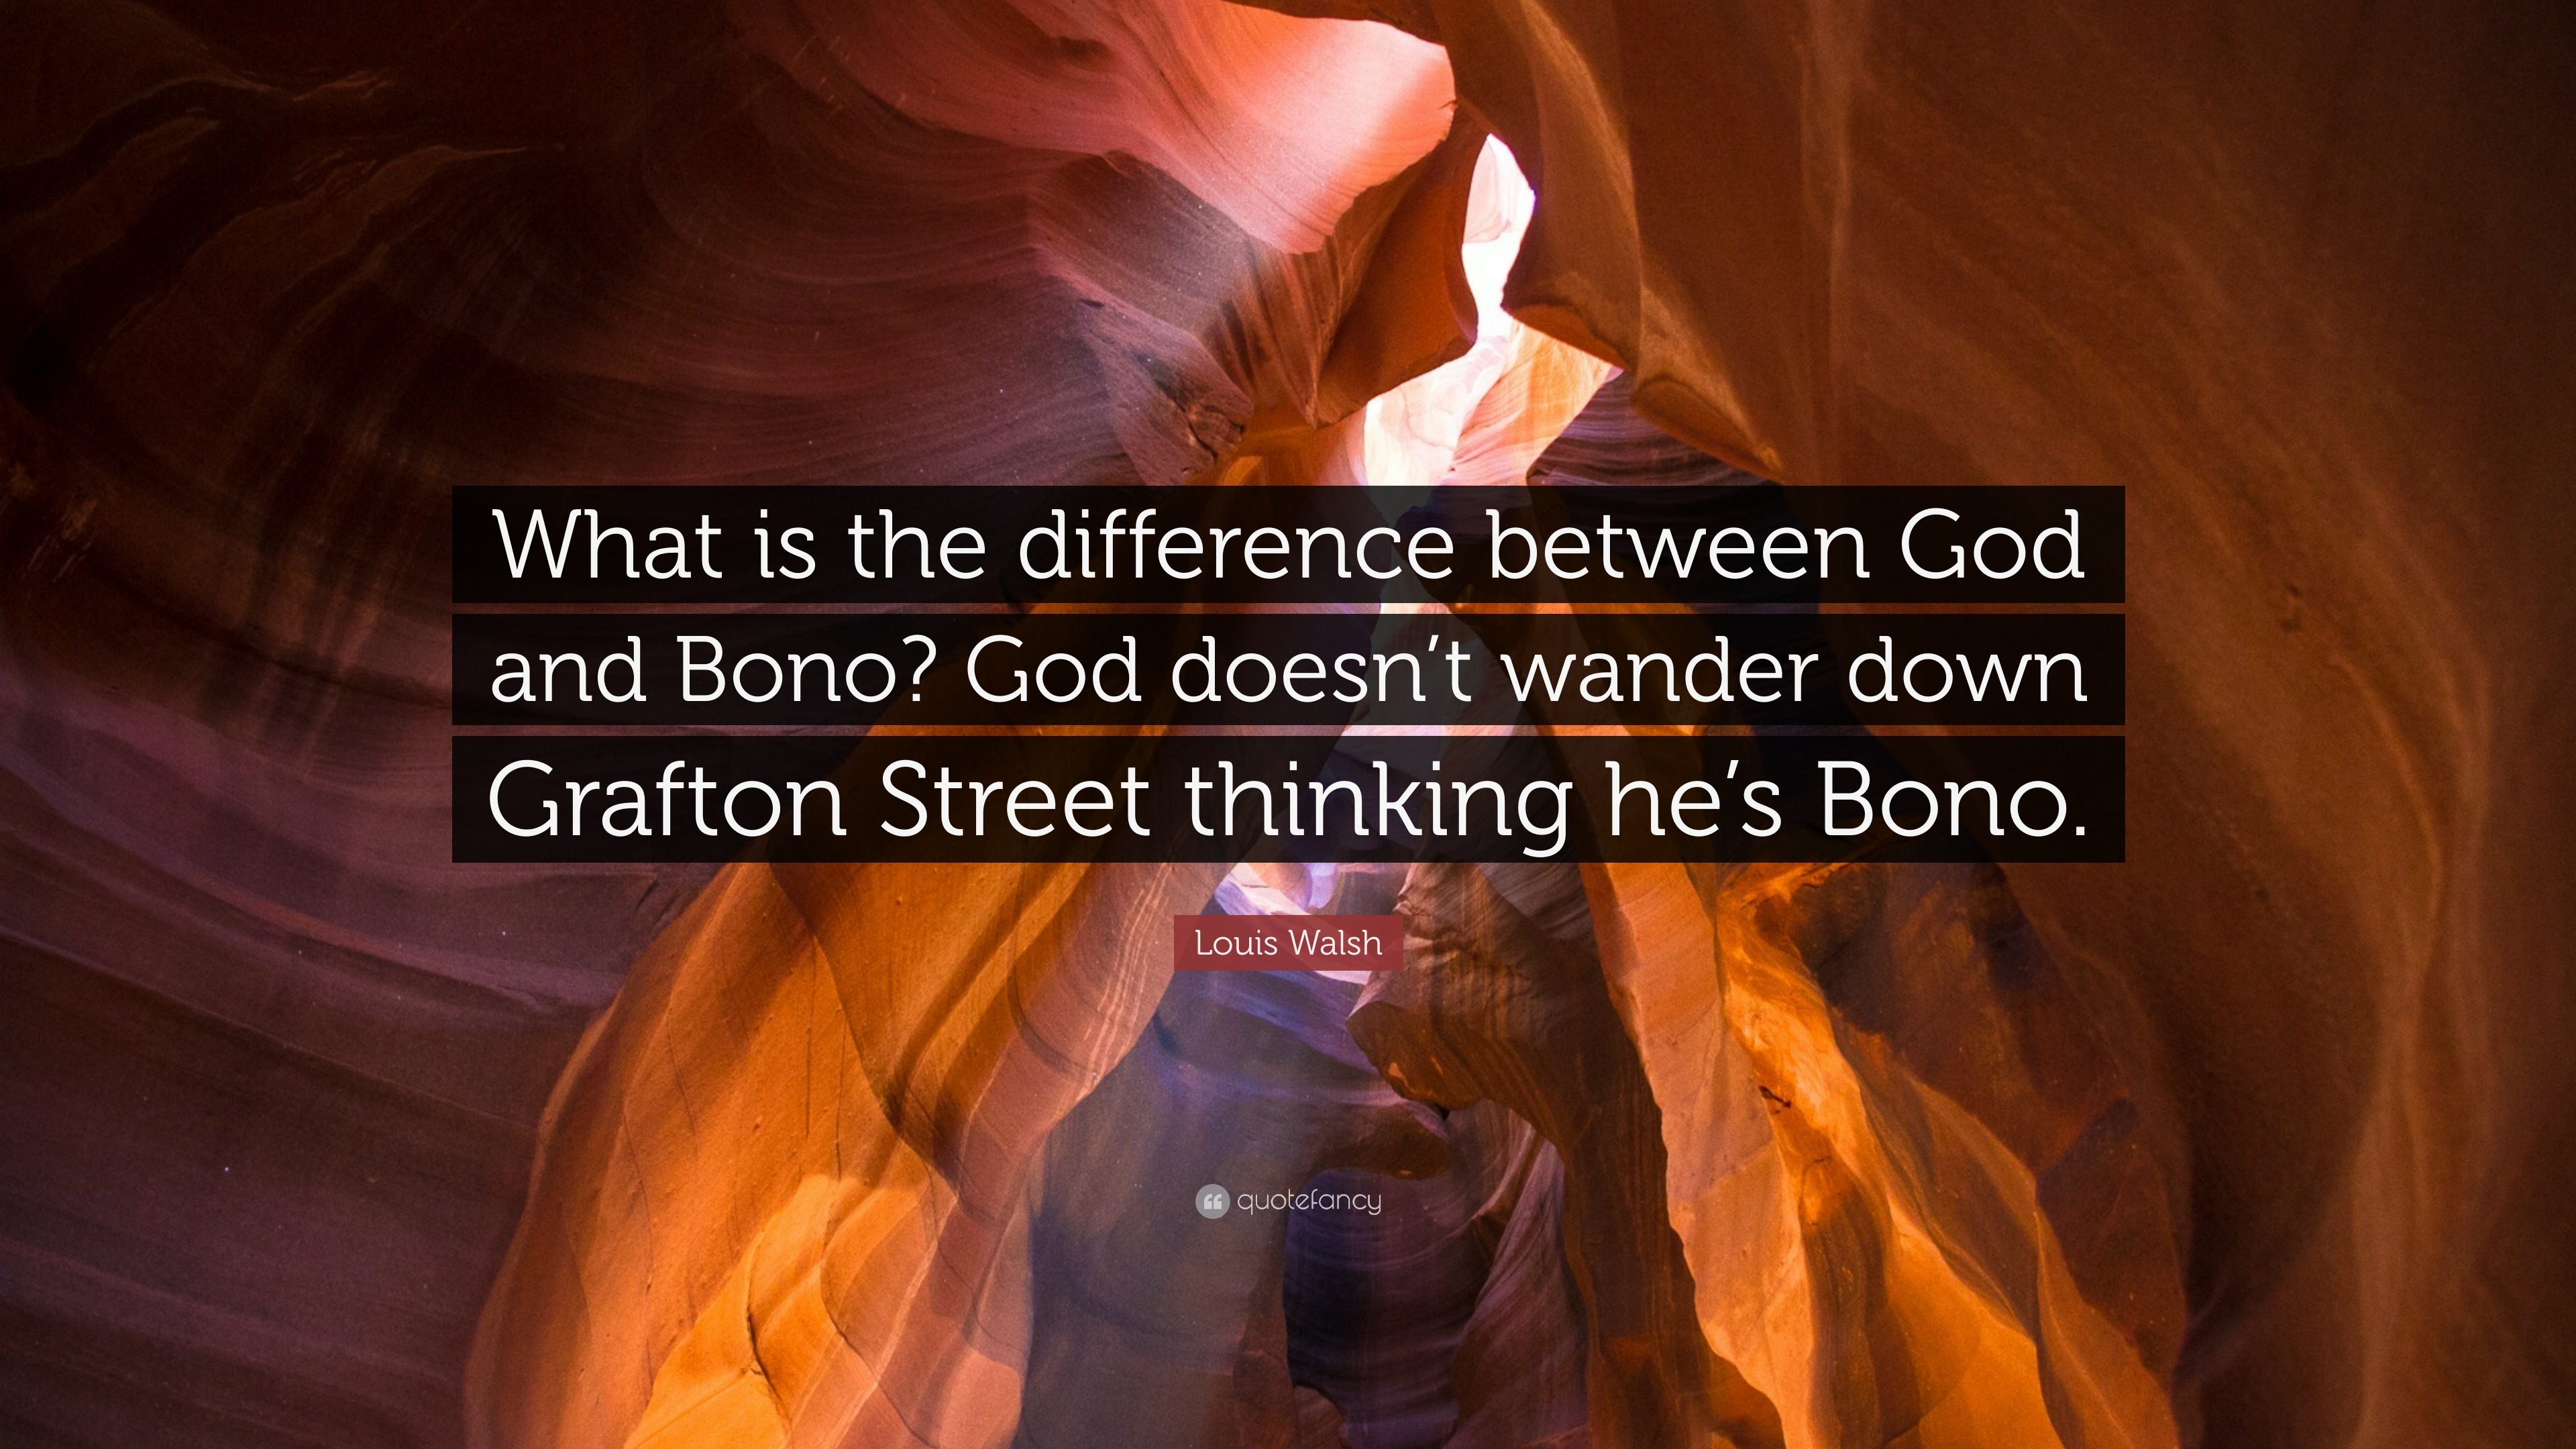 Louis Walsh quote: What is the difference between God and Bono